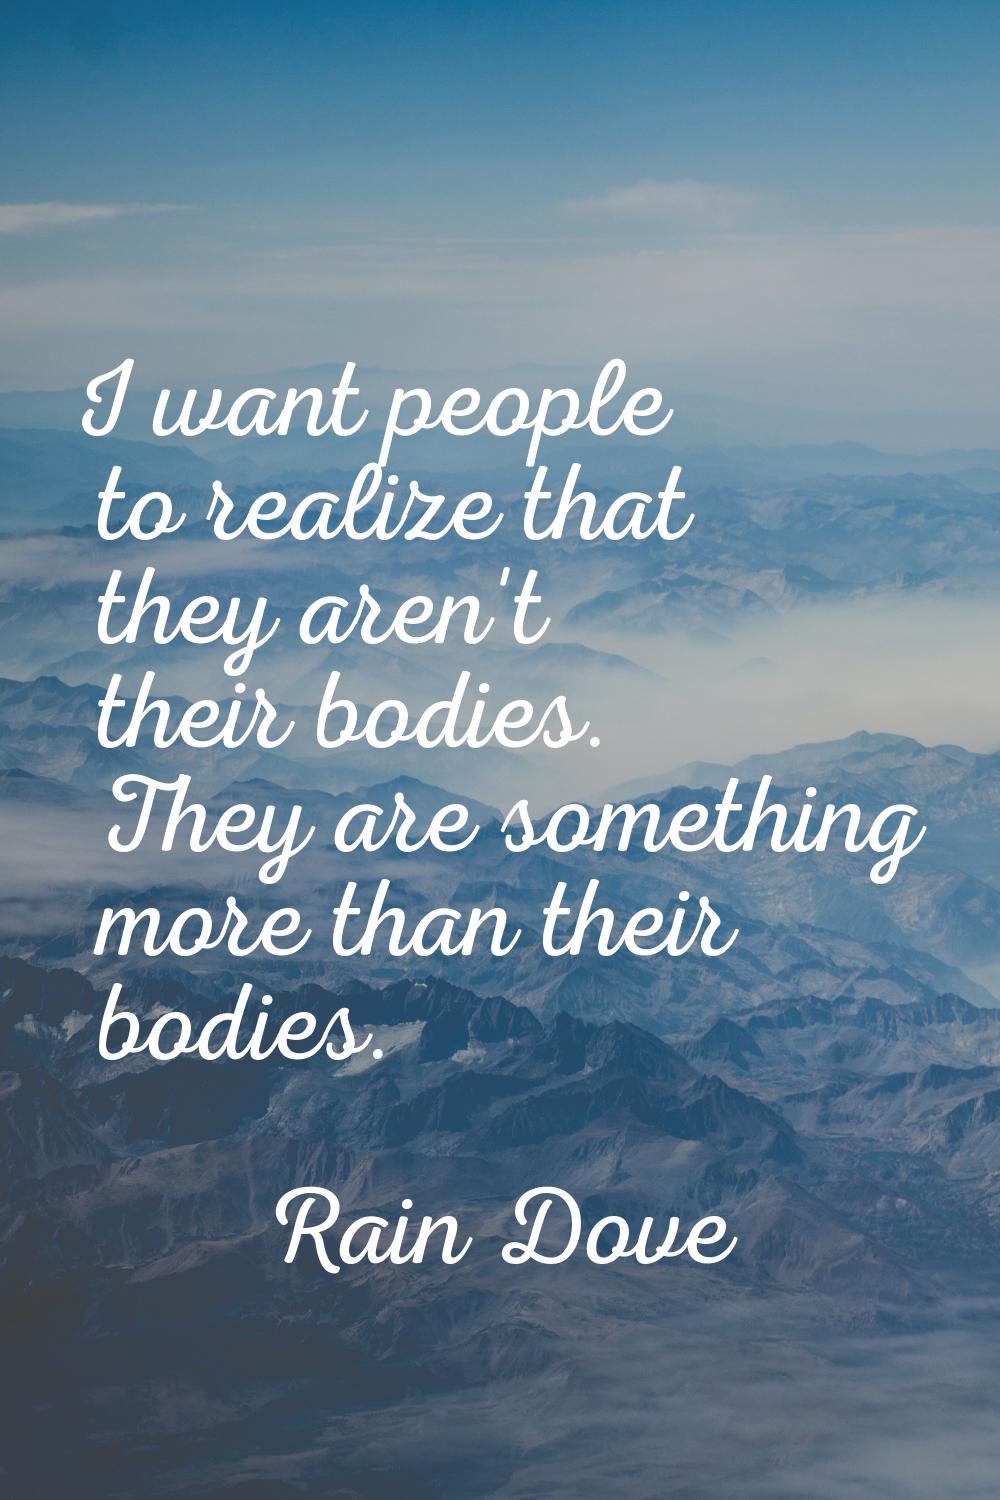 I want people to realize that they aren't their bodies. They are something more than their bodies.